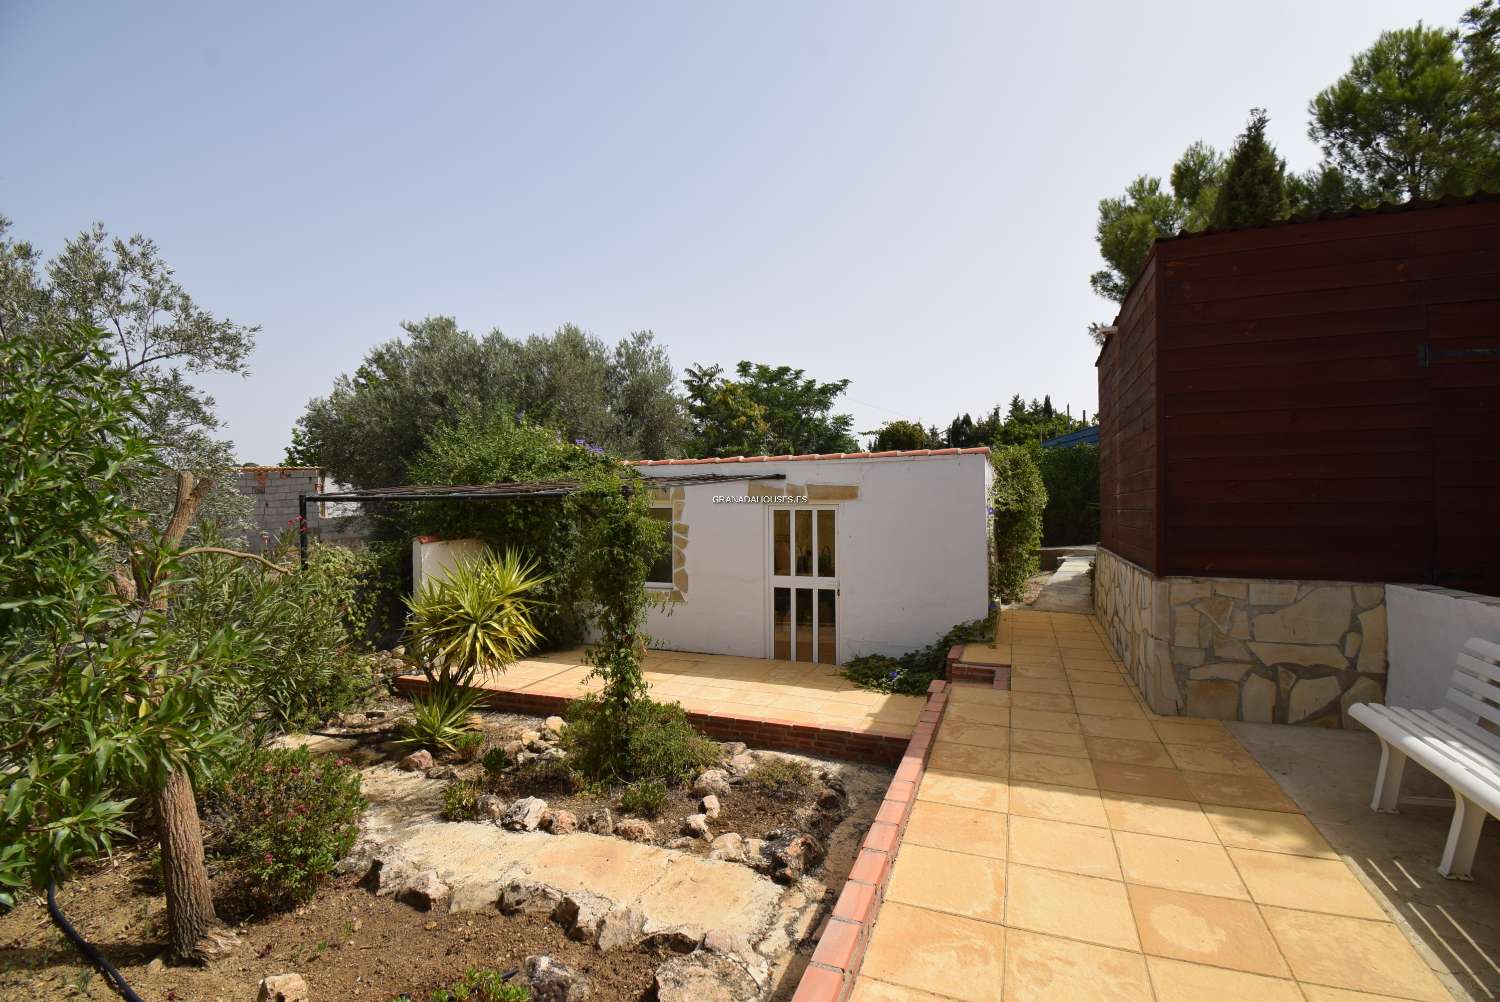 Fantastic country villa with annexe, garden, large pool and stunning mountain views